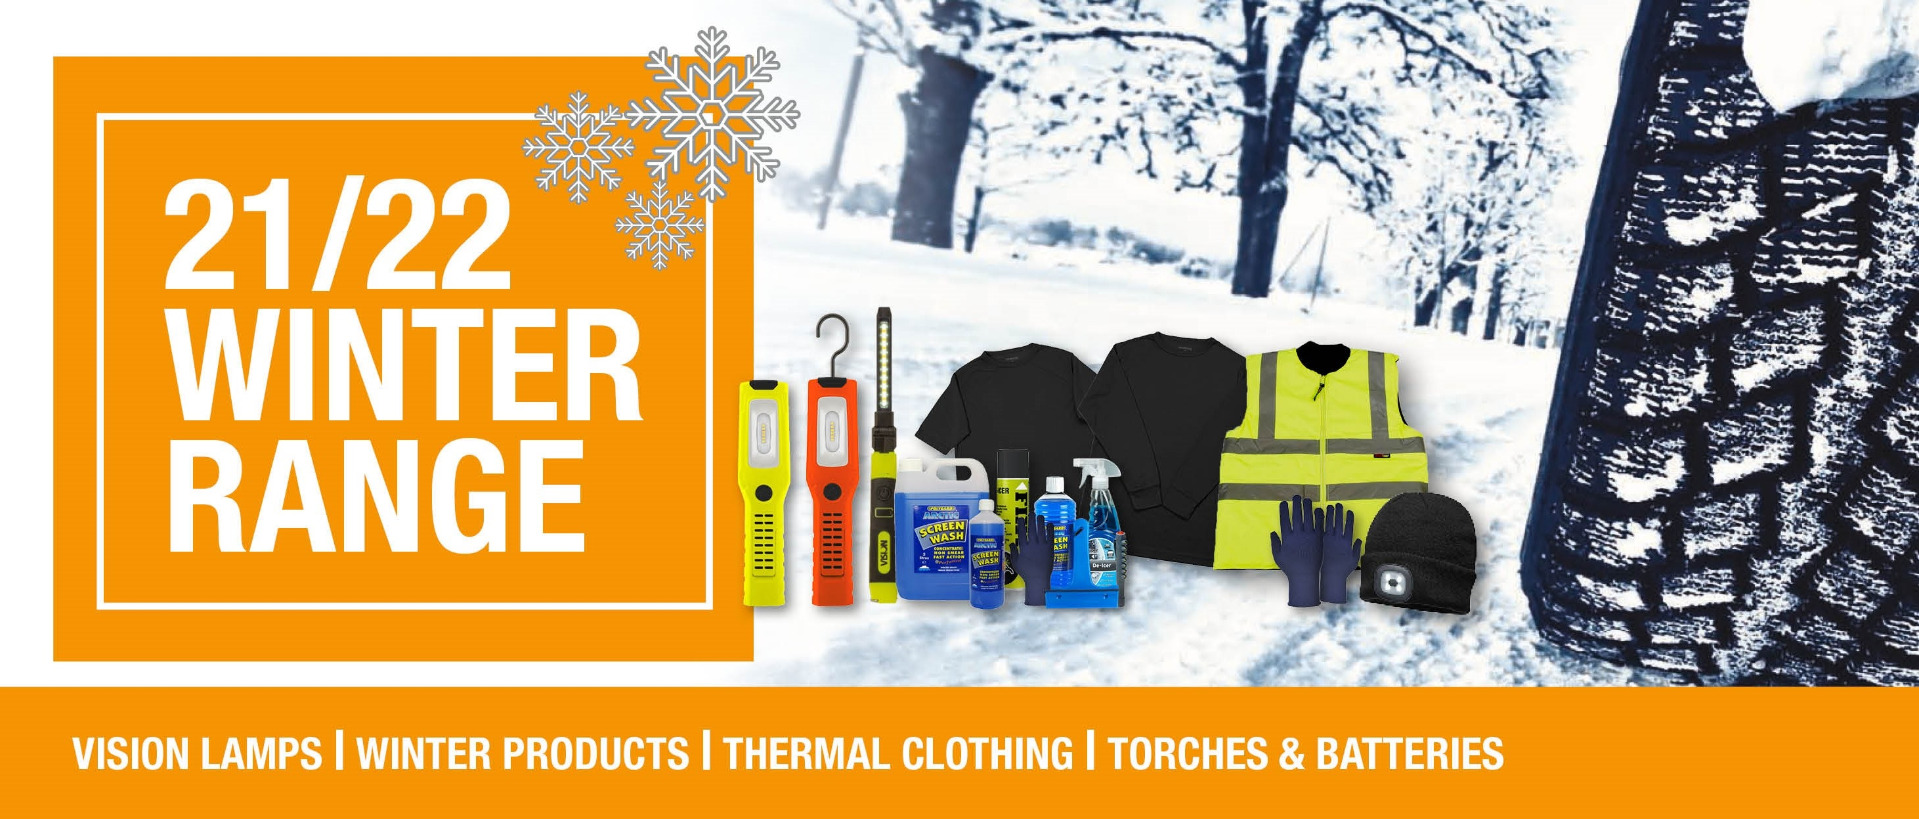 21/22 Winter Range - Vision Lamps, Winter Products, Thermal Clothing, Torches and Batteries